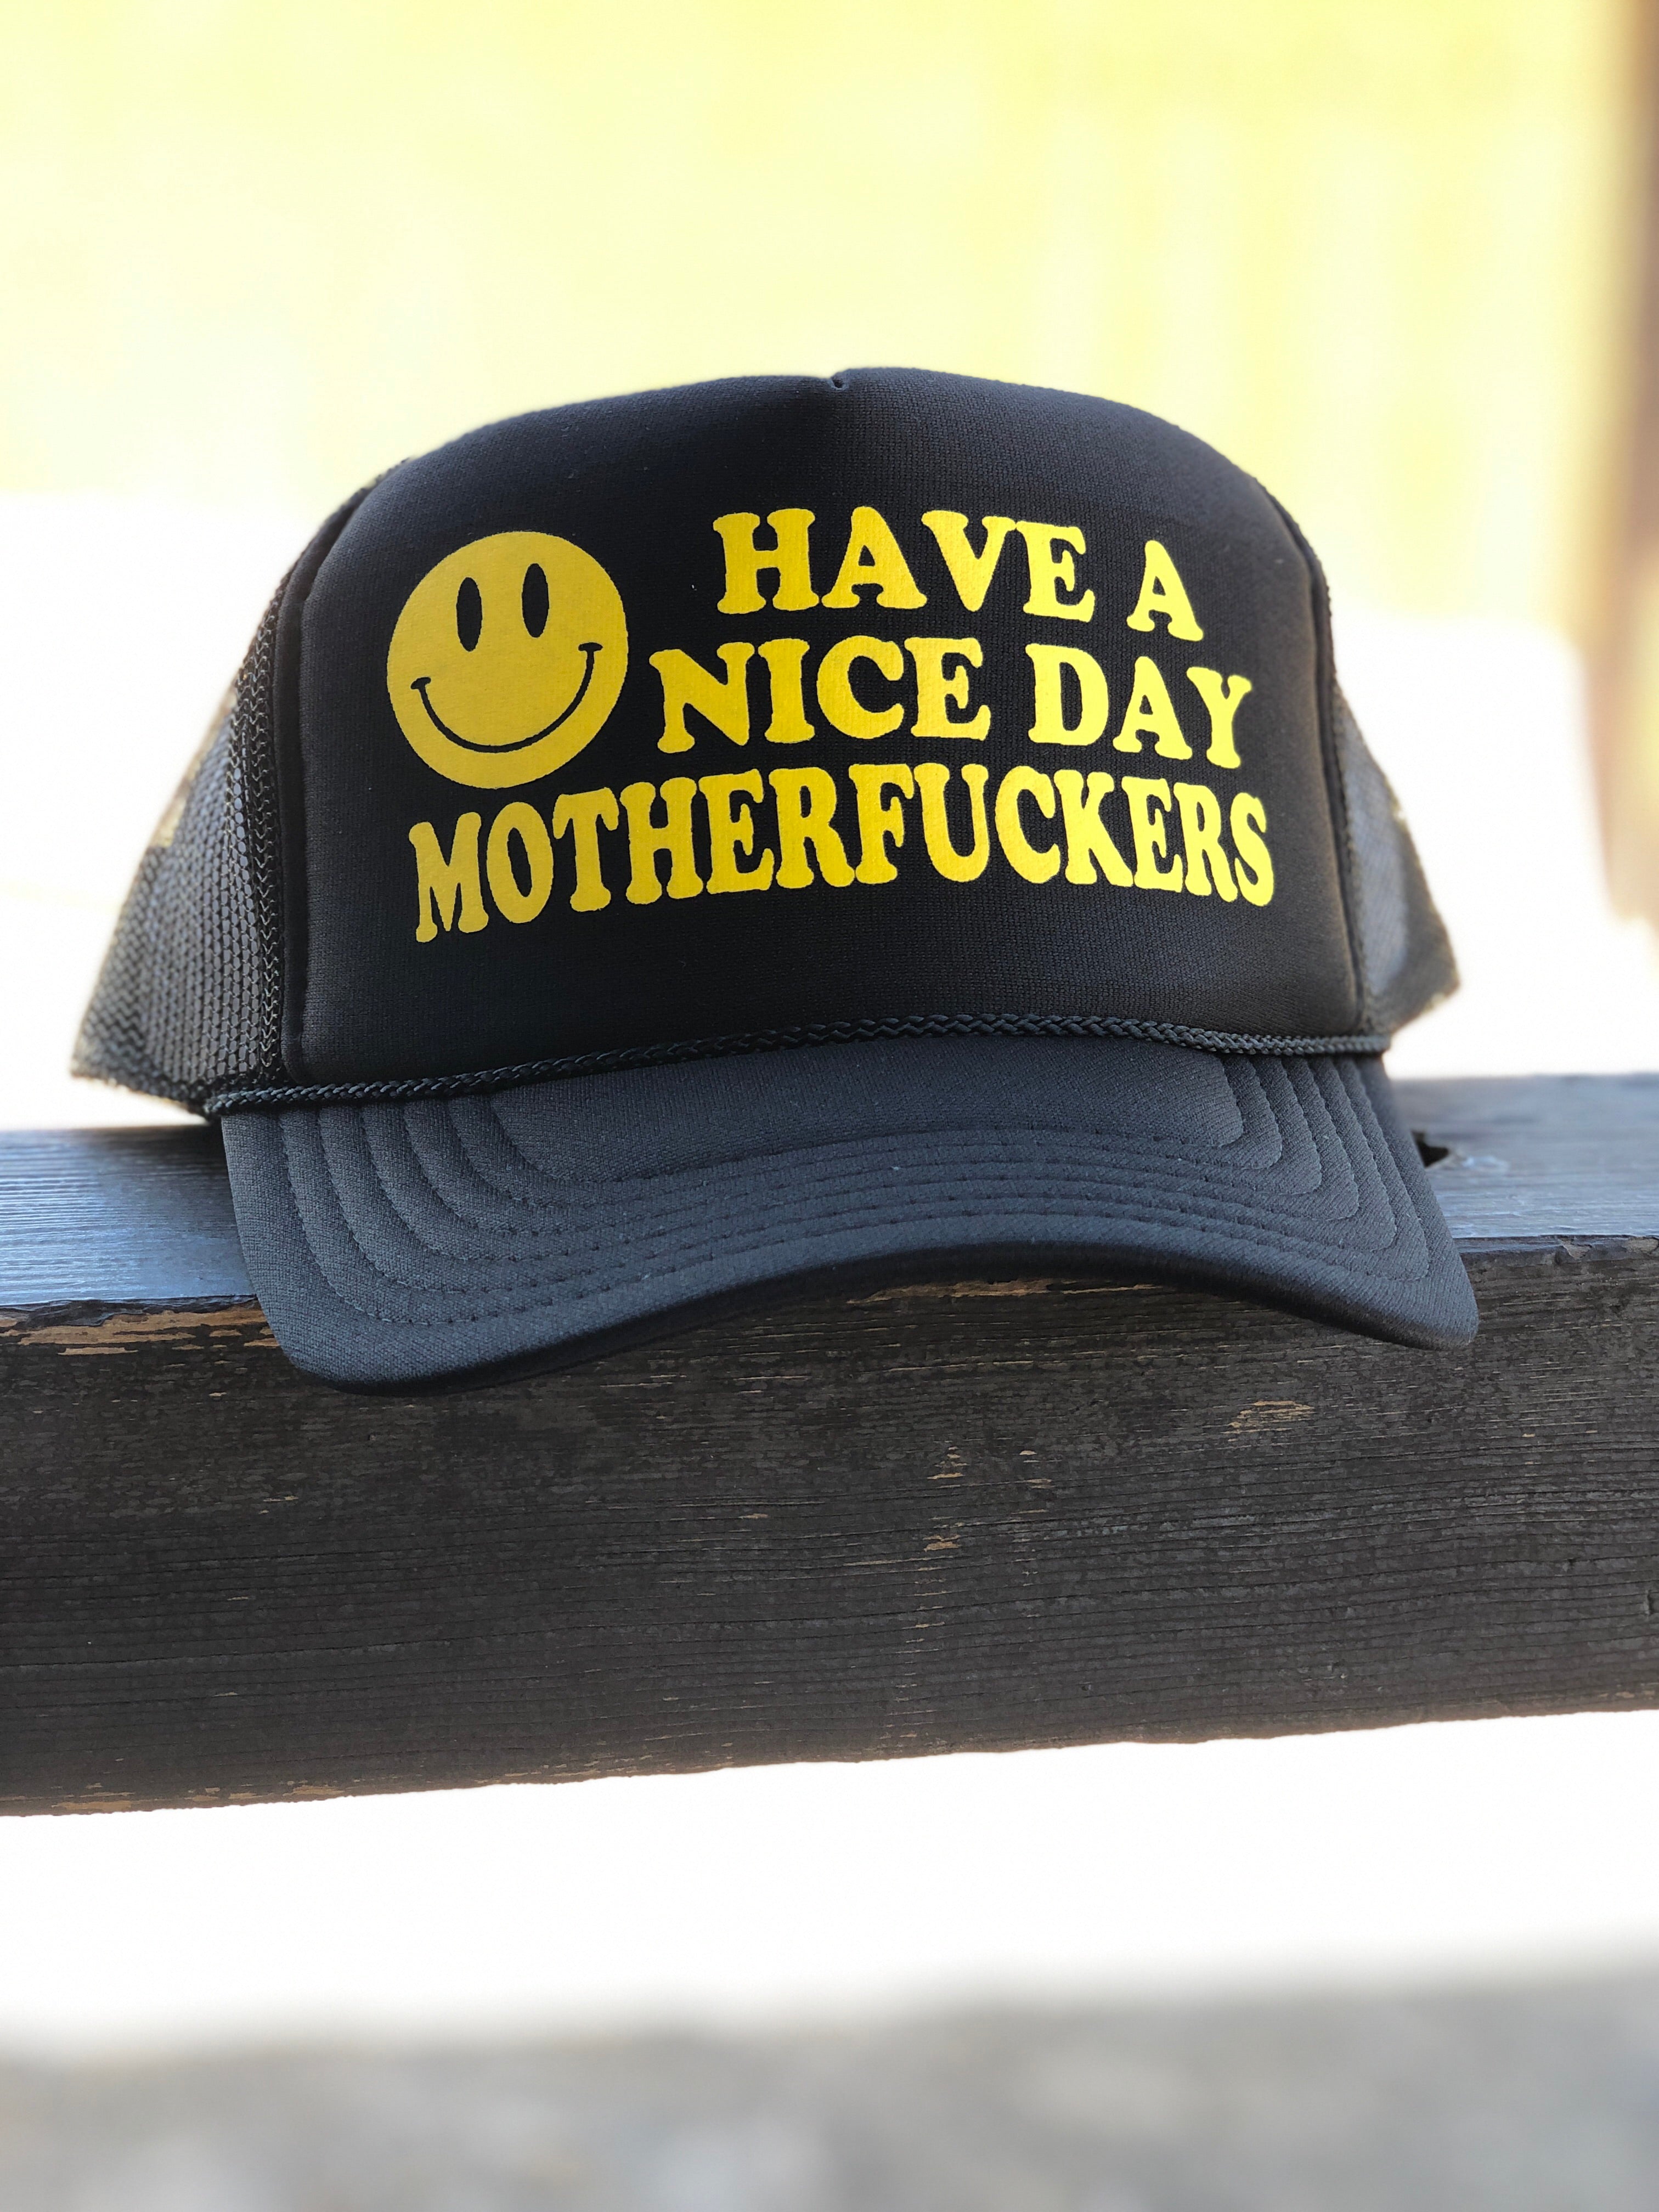 Have a nice day motherfucker hat